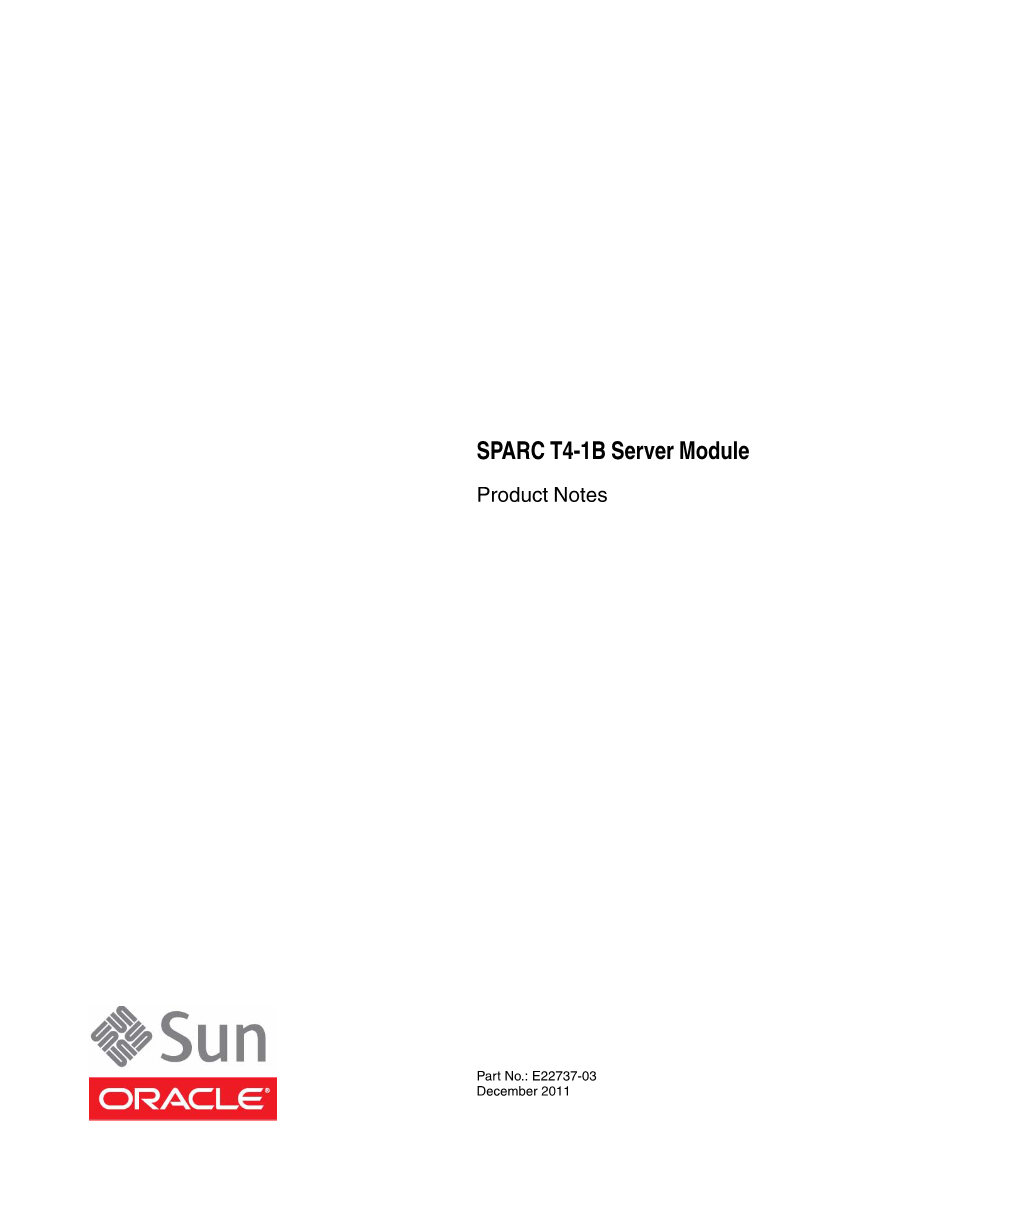 SPARC T4-1B Server Module Product Notes